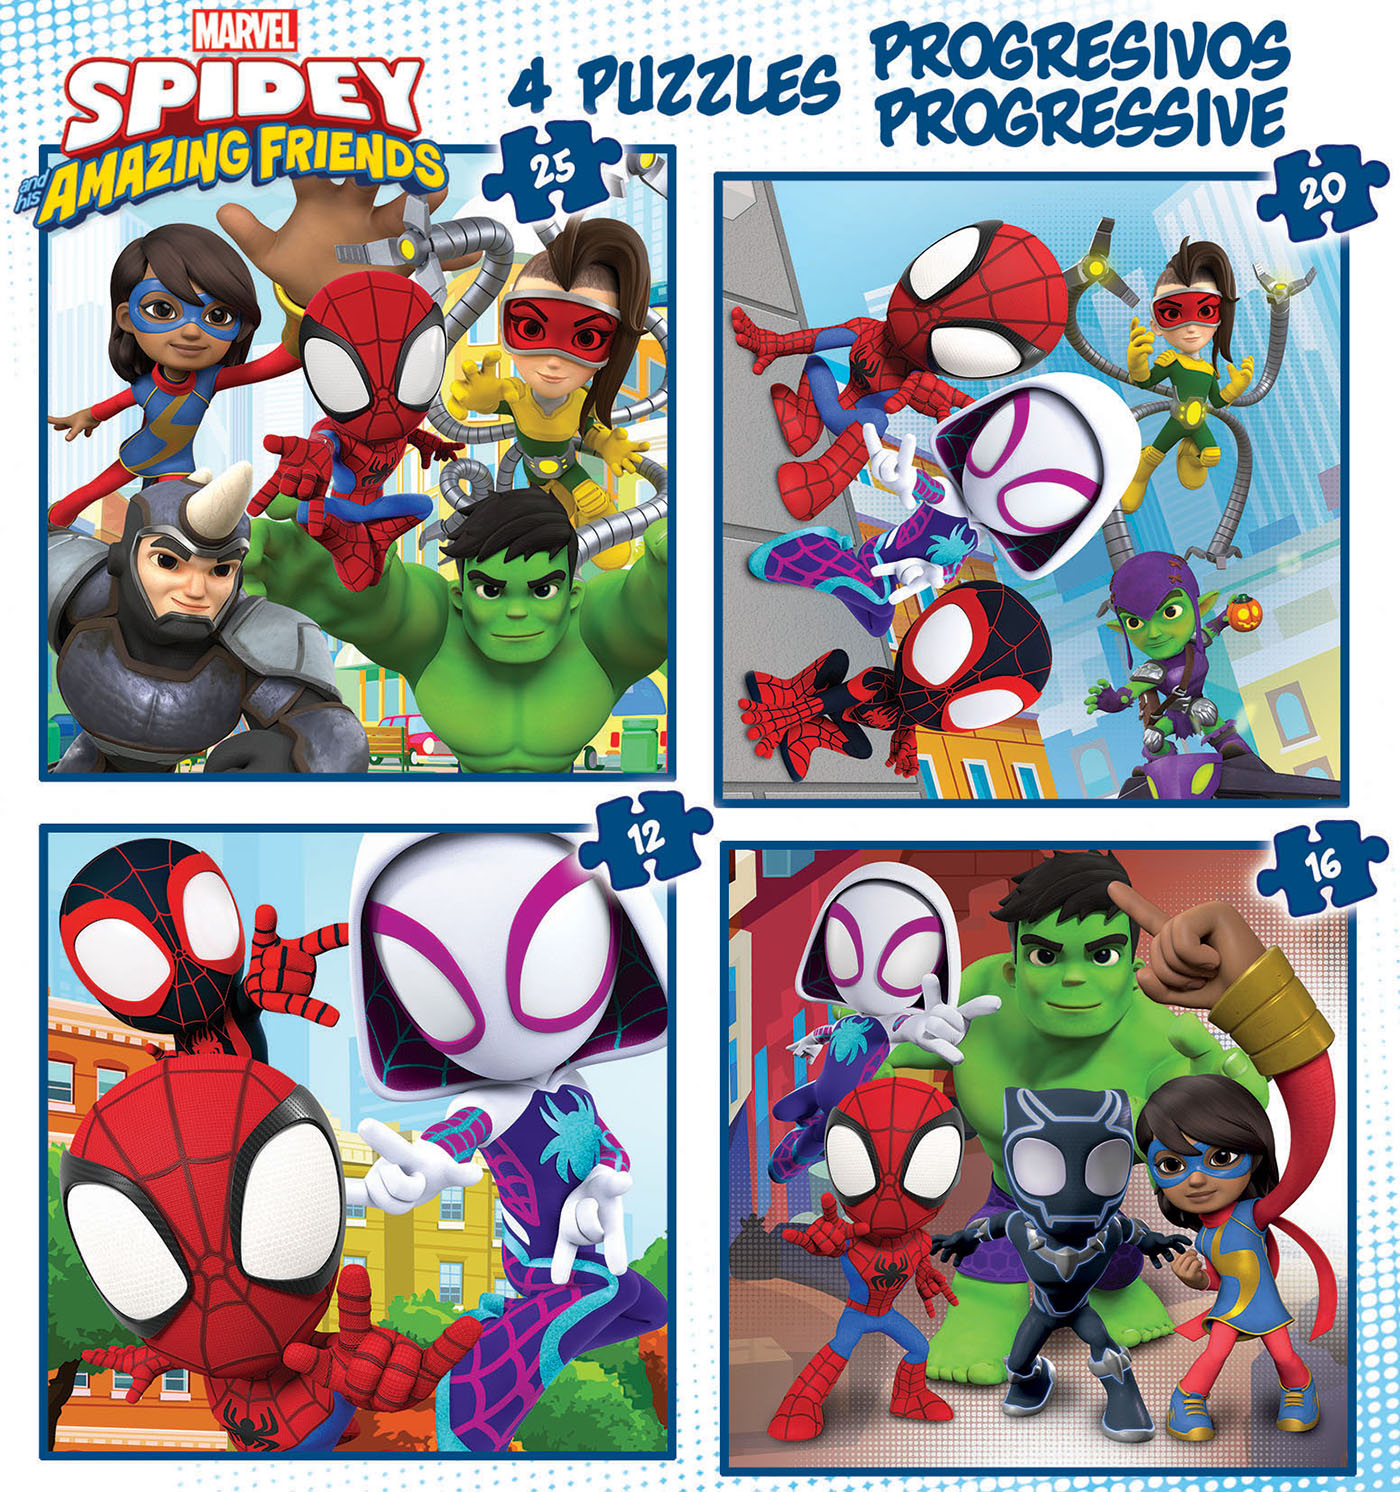 Spidey and His Amazing Friends Puzzle